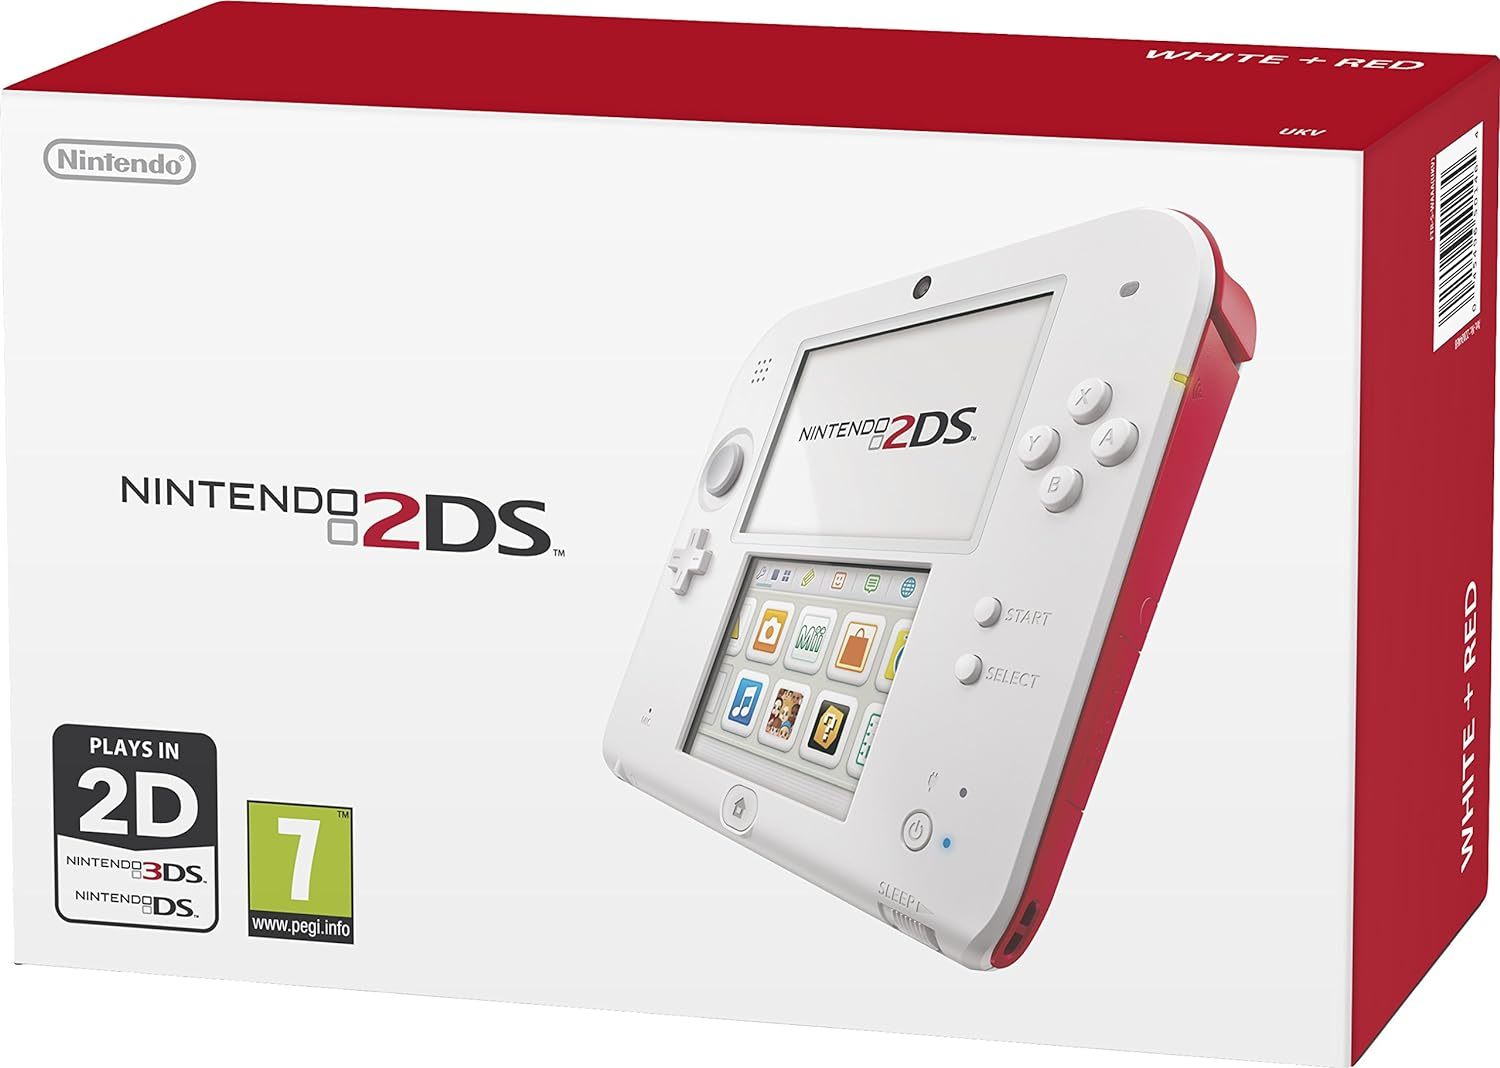 Nintendo Handheld Console 2Ds - White/Red - $206.99